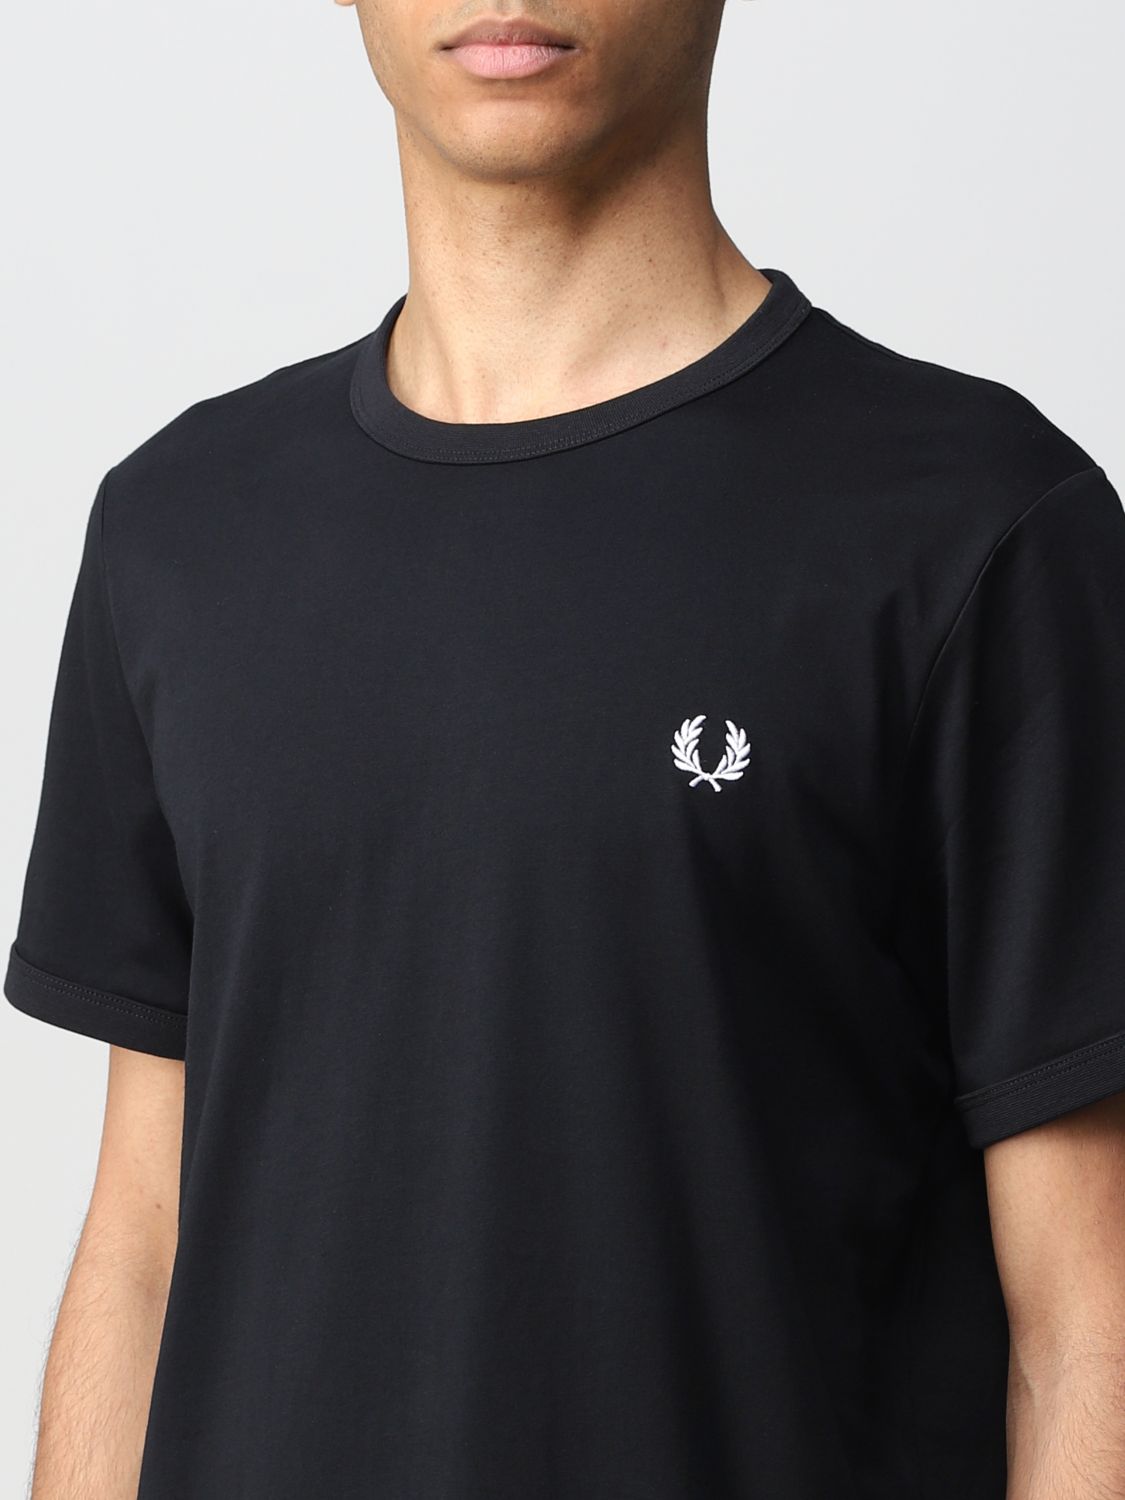 T-shirt Fred Perry: Fred Perry cotton t-shirt black 3